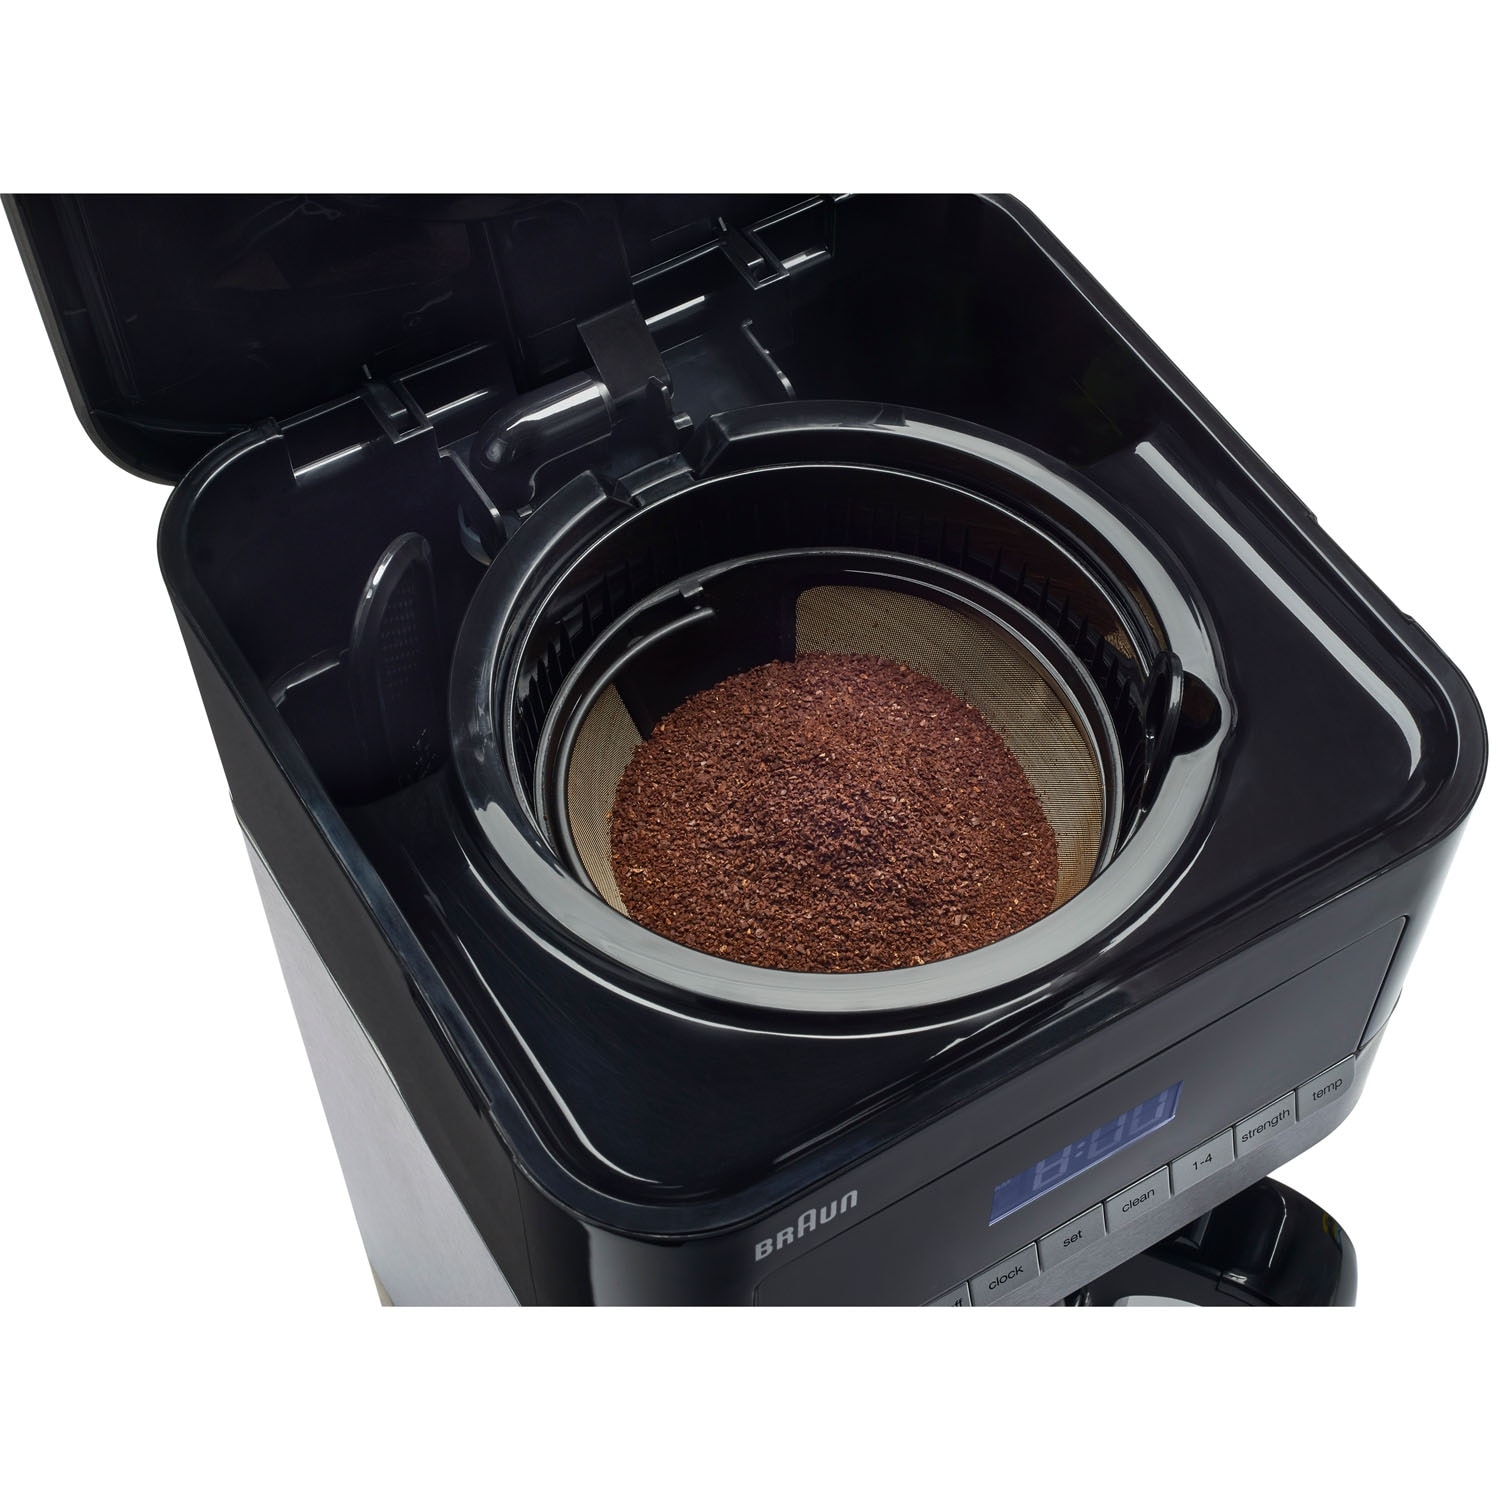 https://ak1.ostkcdn.com/images/products/is/images/direct/75b676e8ceaa95482c75cceced25fe12cc78b7e2/Braun-BrewSense-12-Cup-Drip-Coffee-Maker-with-Brew-Strength-Selector-and-Glass-Carafe-in-Stainless-Steel.jpg